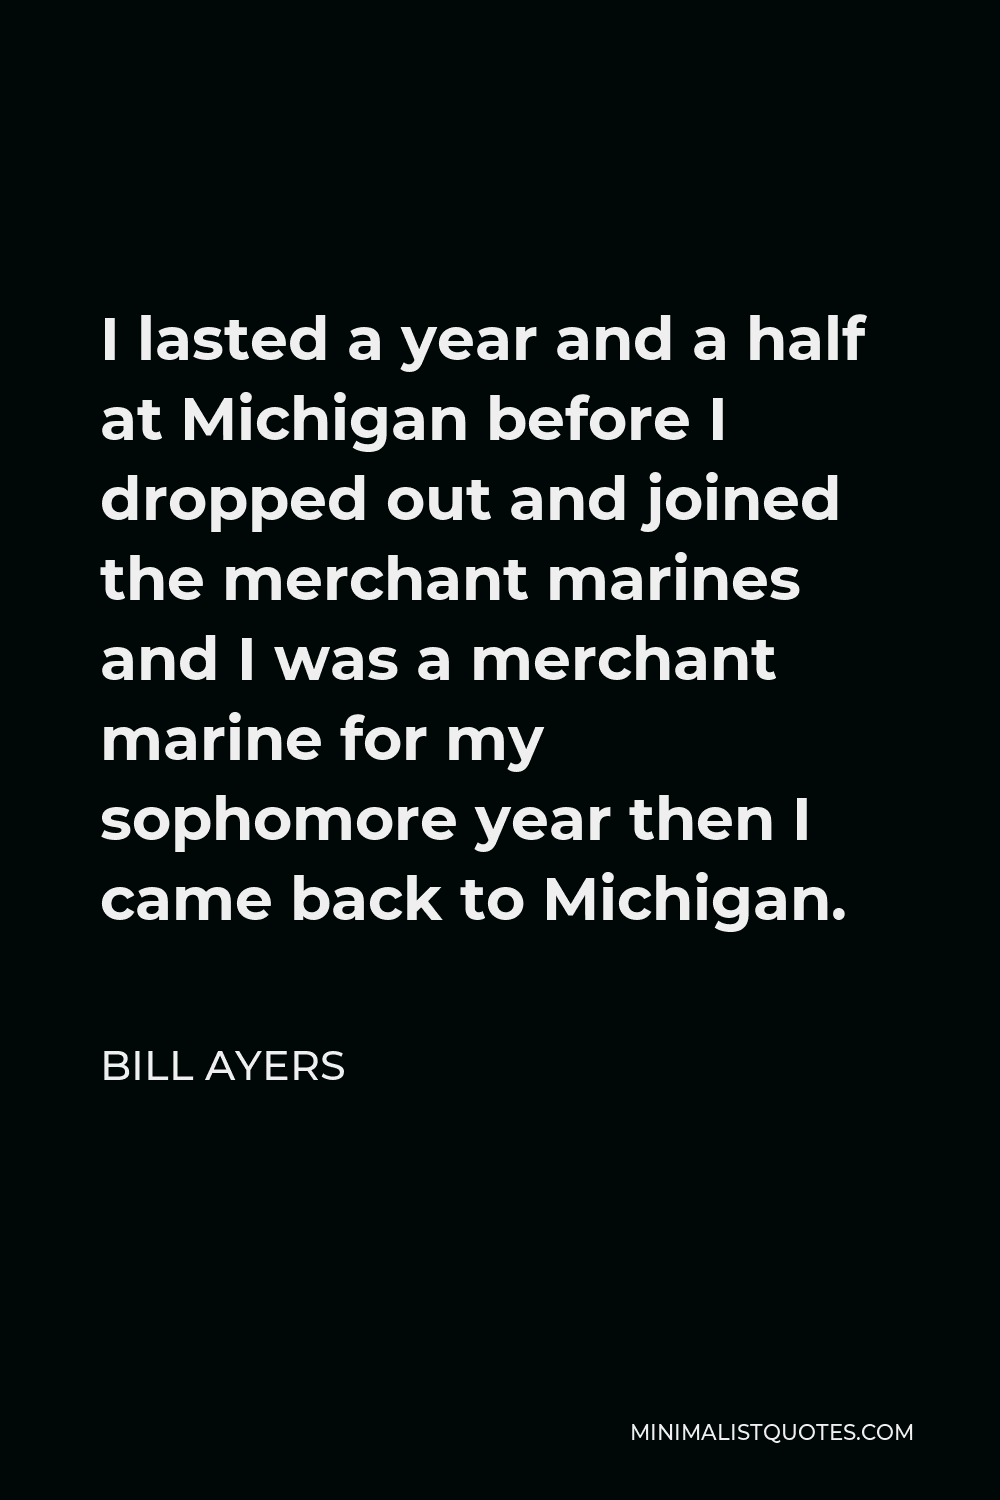 Bill Ayers Quote - I lasted a year and a half at Michigan before I dropped out and joined the merchant marines and I was a merchant marine for my sophomore year then I came back to Michigan.